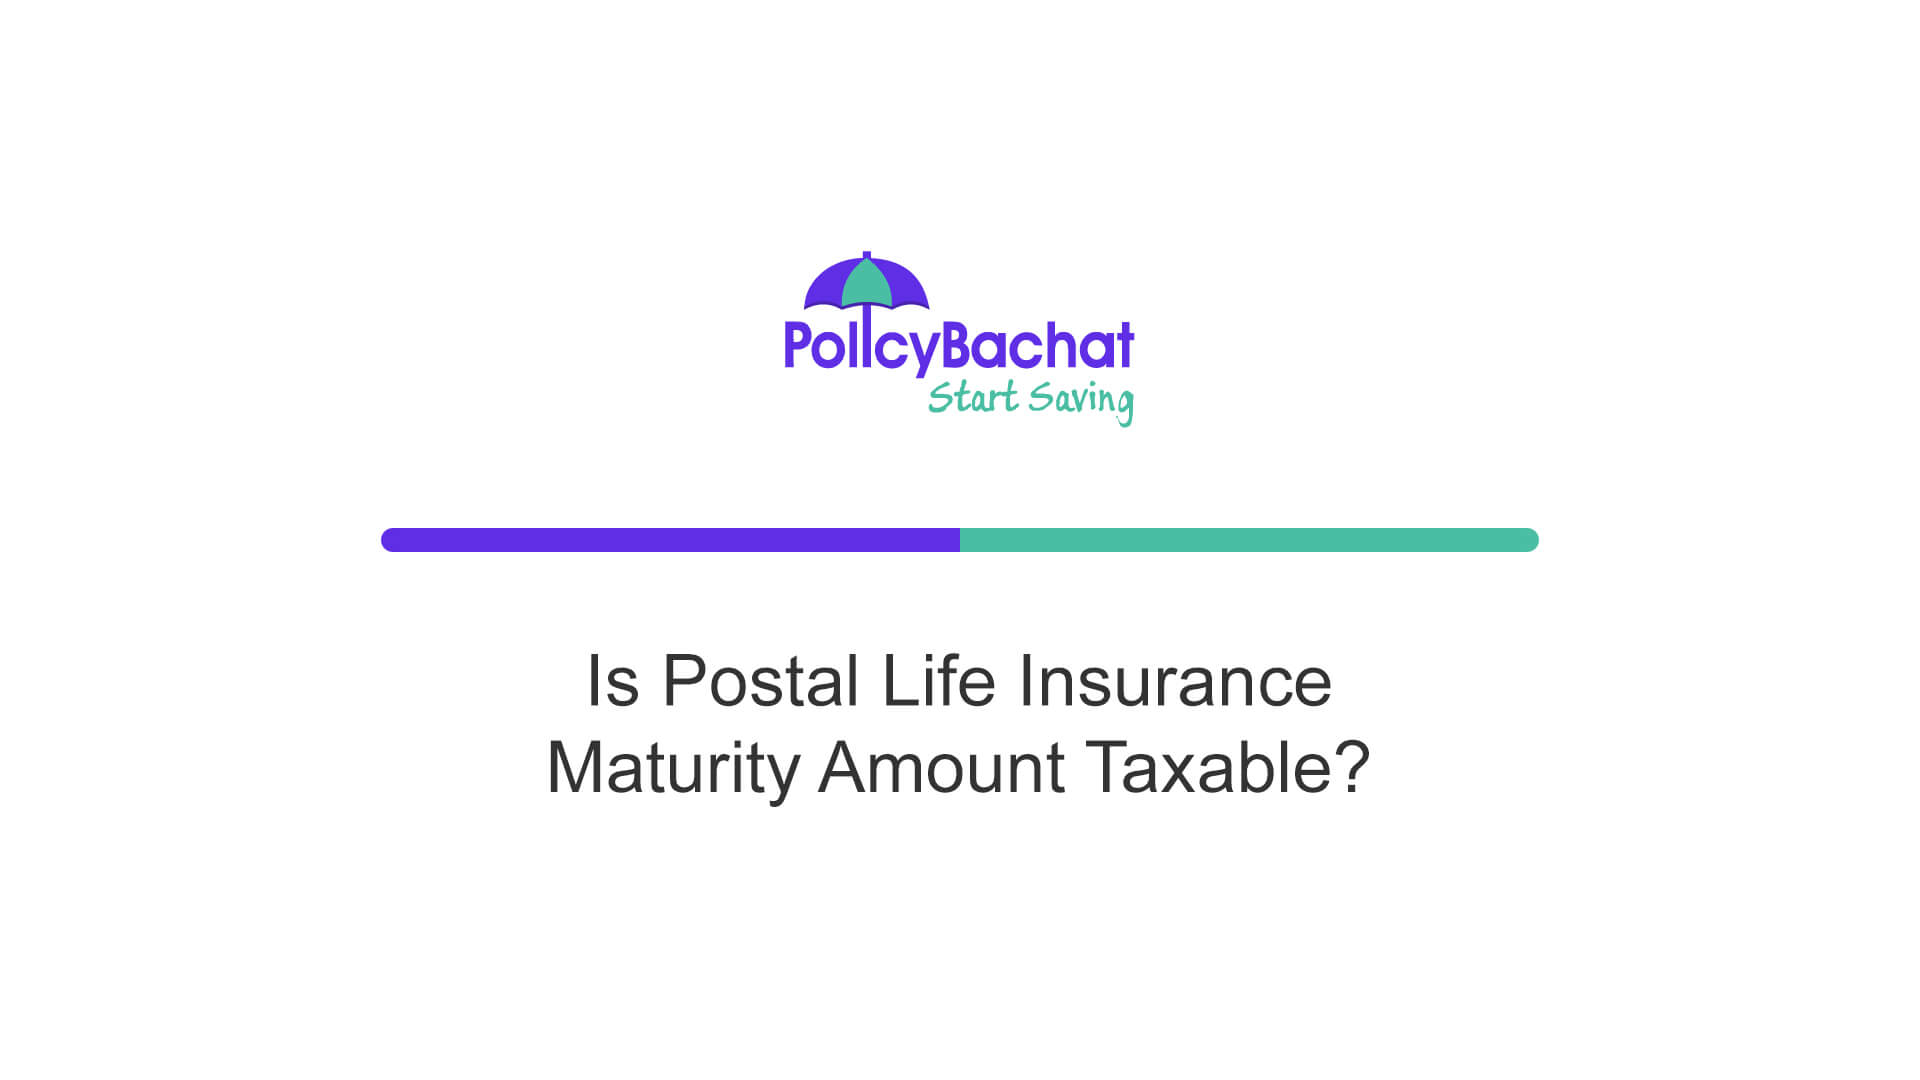 is-postal-life-insurance-maturity-amount-taxable-policybachat